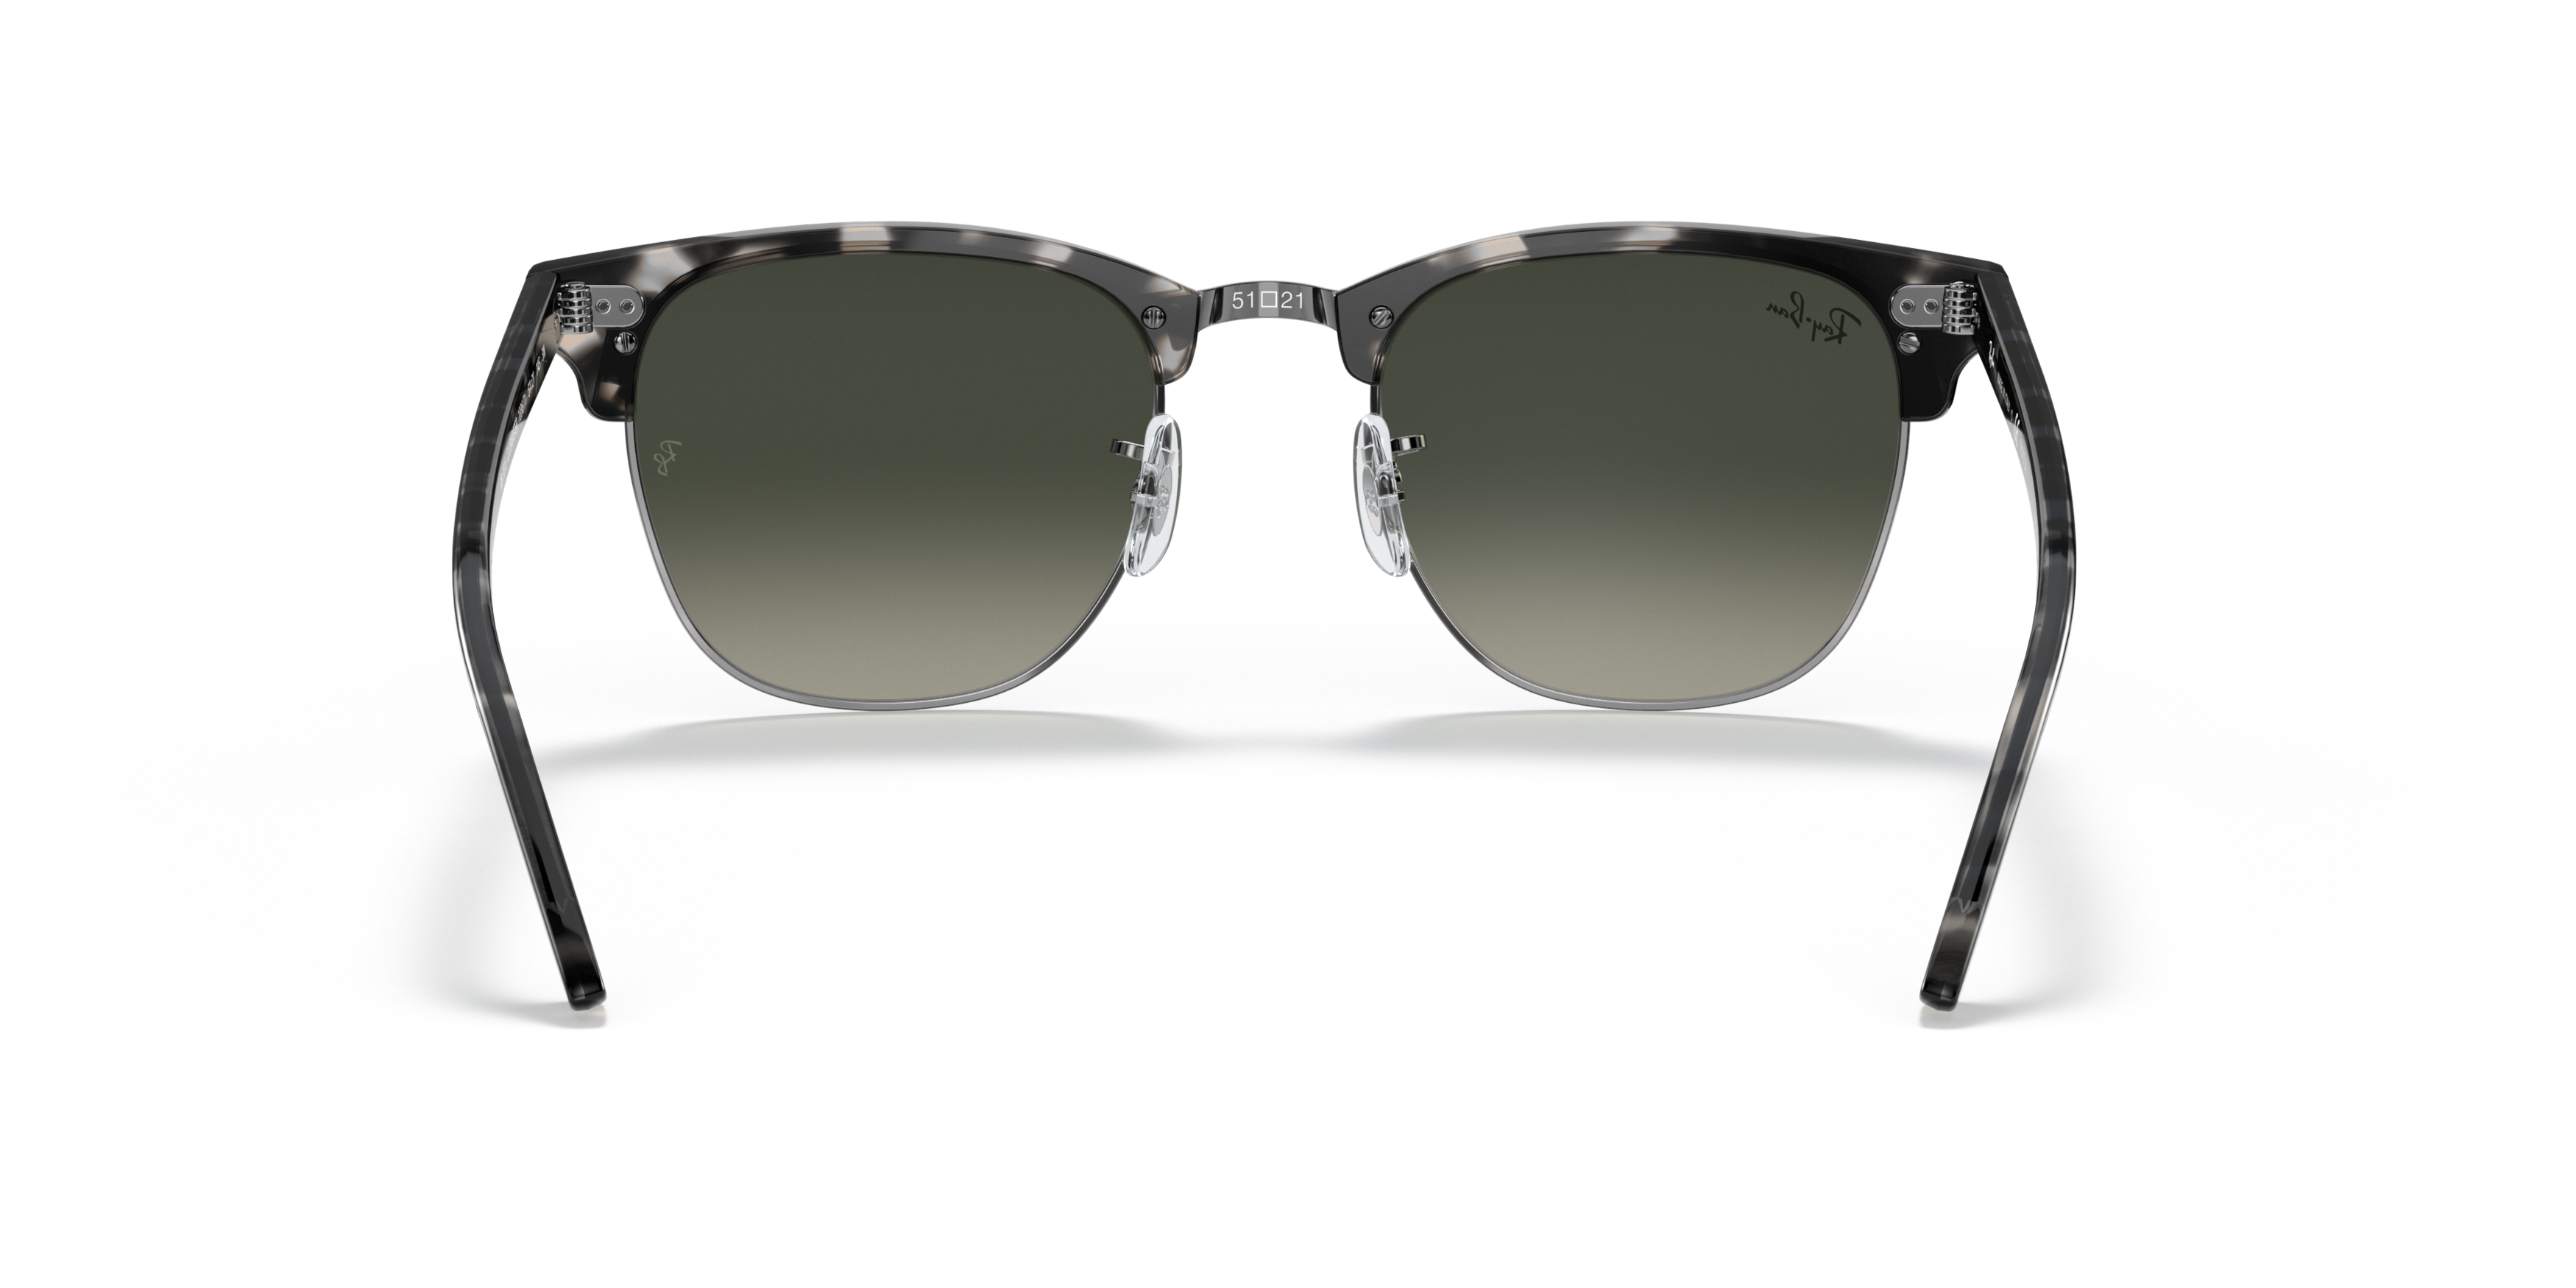 [products.image.detail02] Ray-Ban Clubmaster RB3016 133671